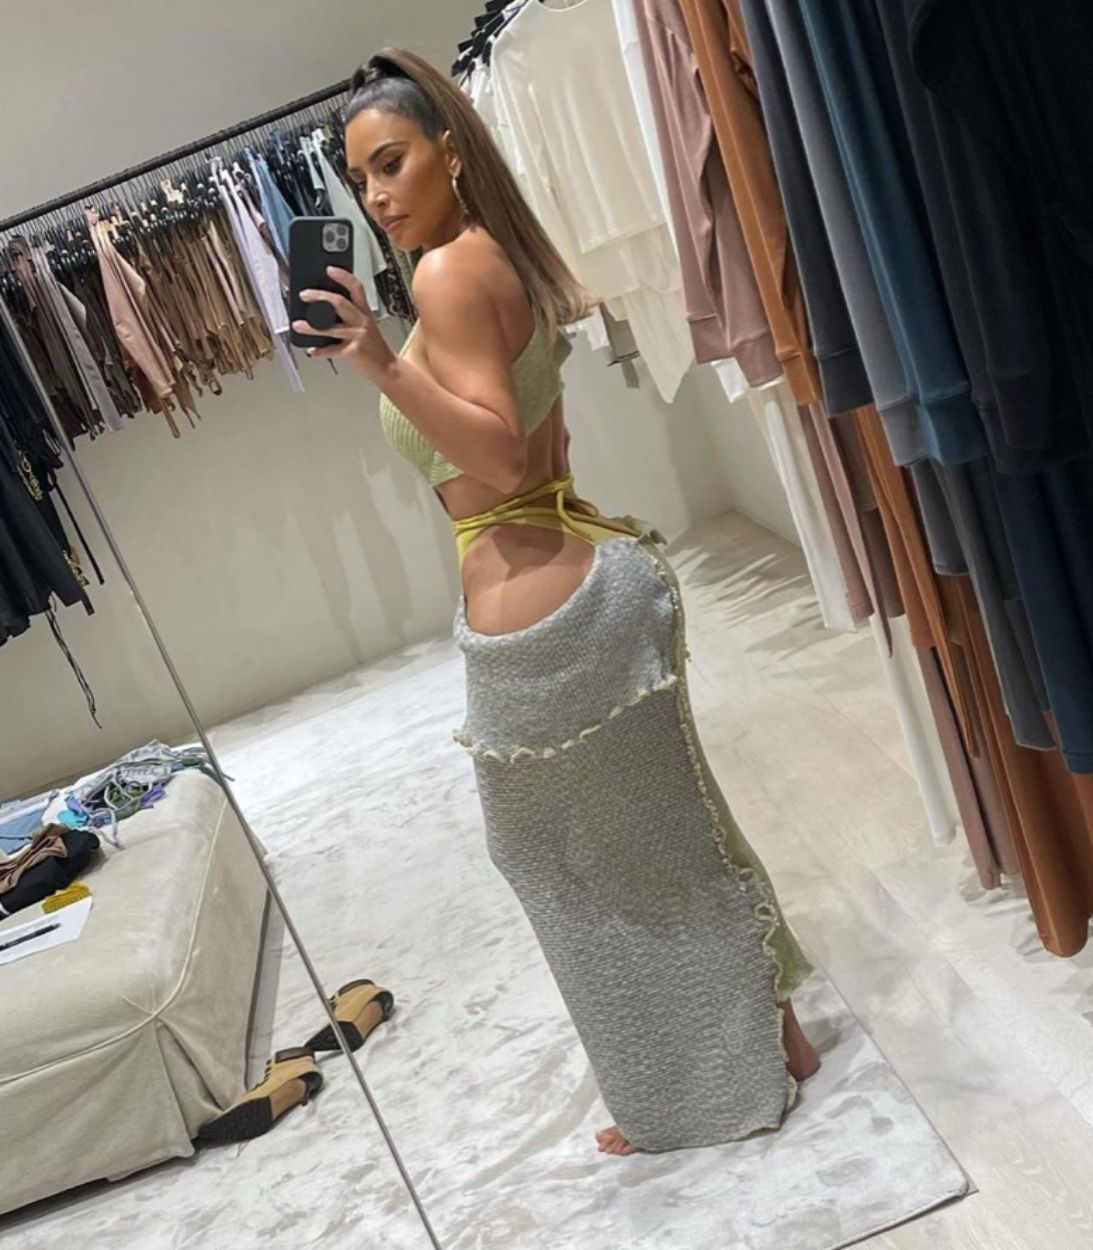 Kim -Outfits- Kanye West-Keeping Up With The Kardashians